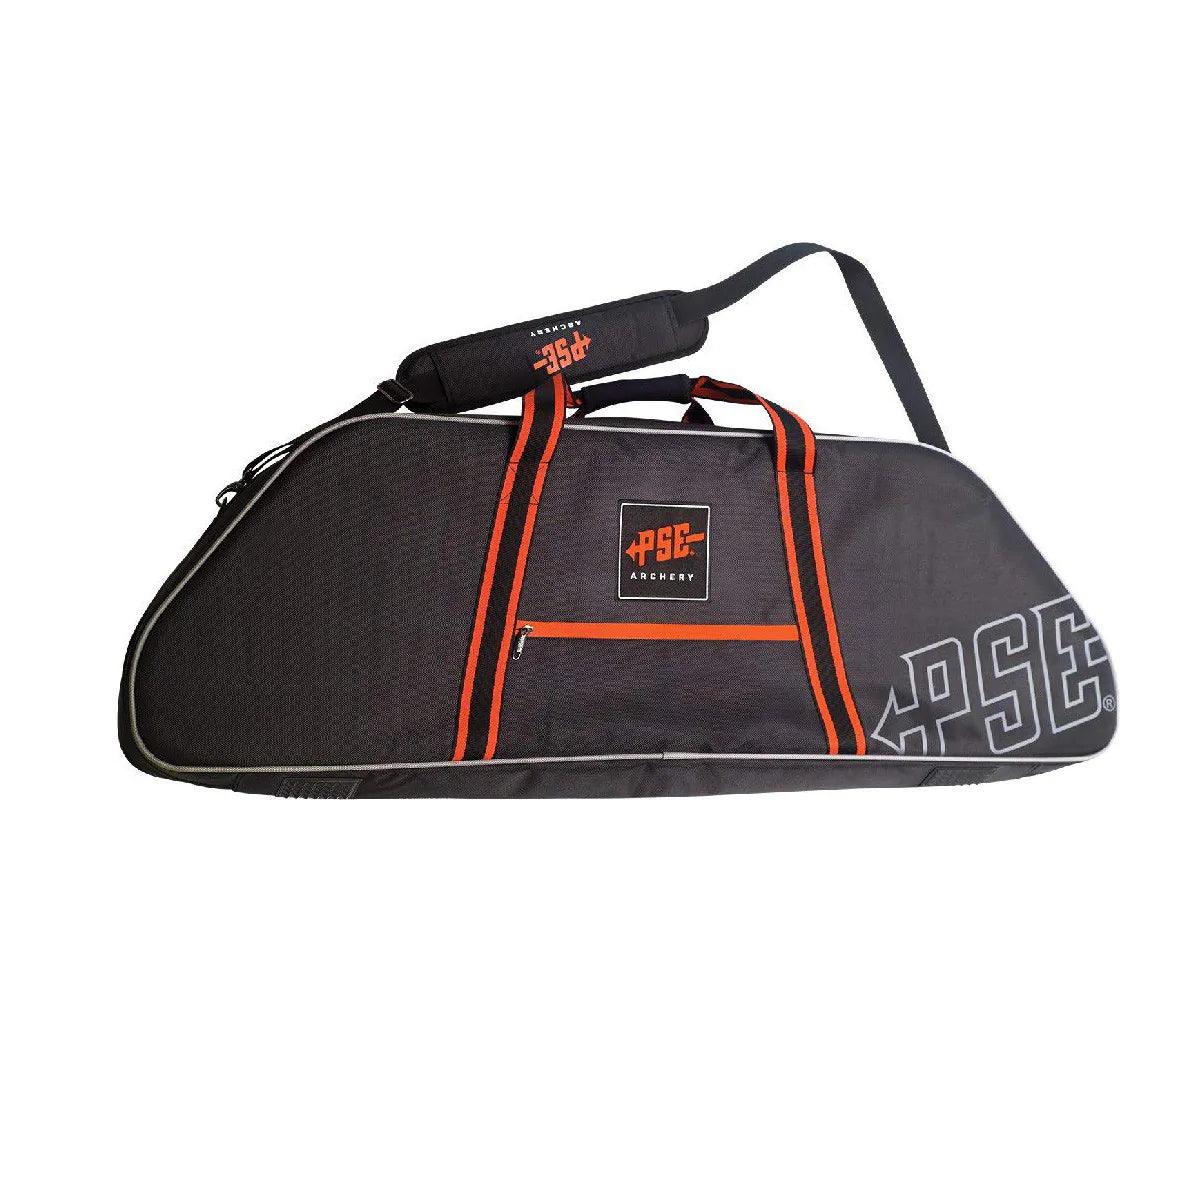 PSE Archery Rigid Hunter Bow Case - Leapfrog Outdoor Sports and Apparel